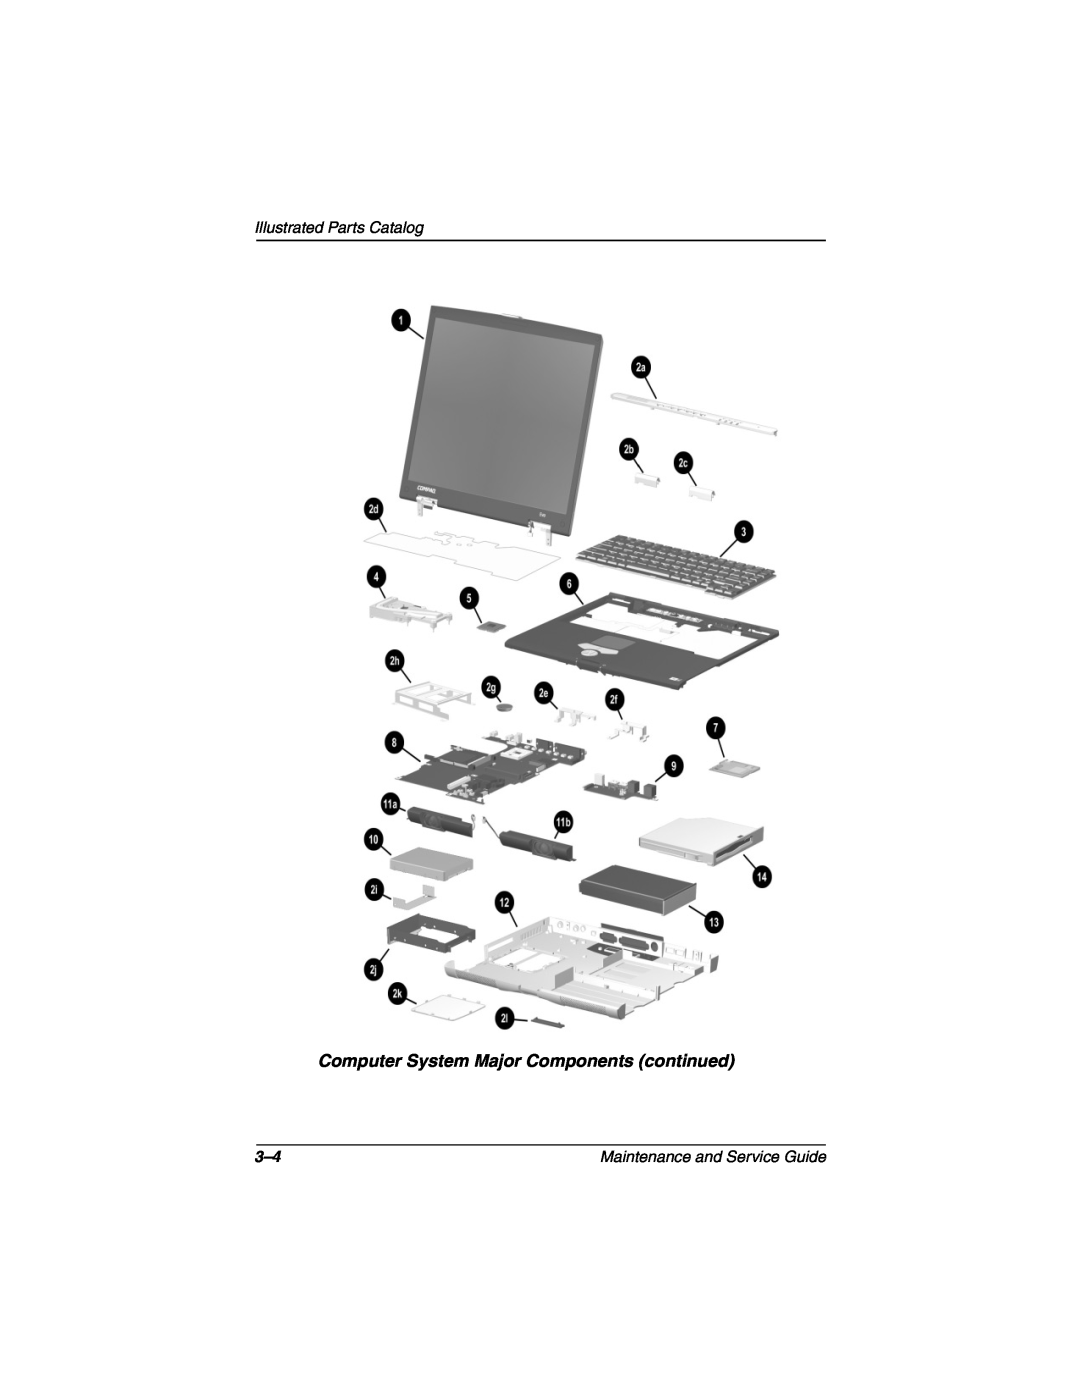 Compaq N160 manual Computer System Major Components continued, Illustrated Parts Catalog, Maintenance and Service Guide 